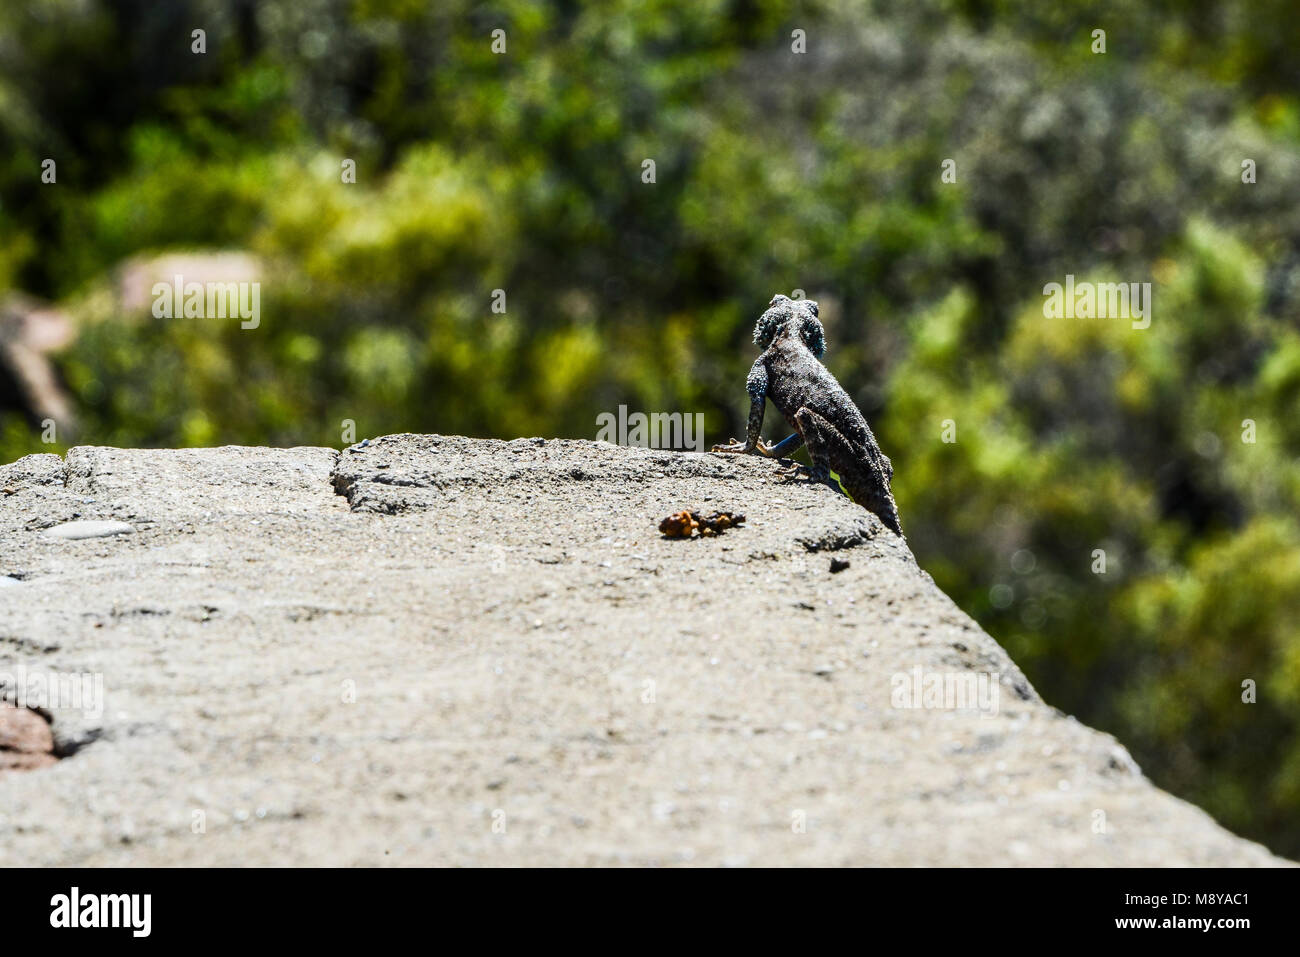 A southern rock agama (Agama atra) on a rock at the Valley Of